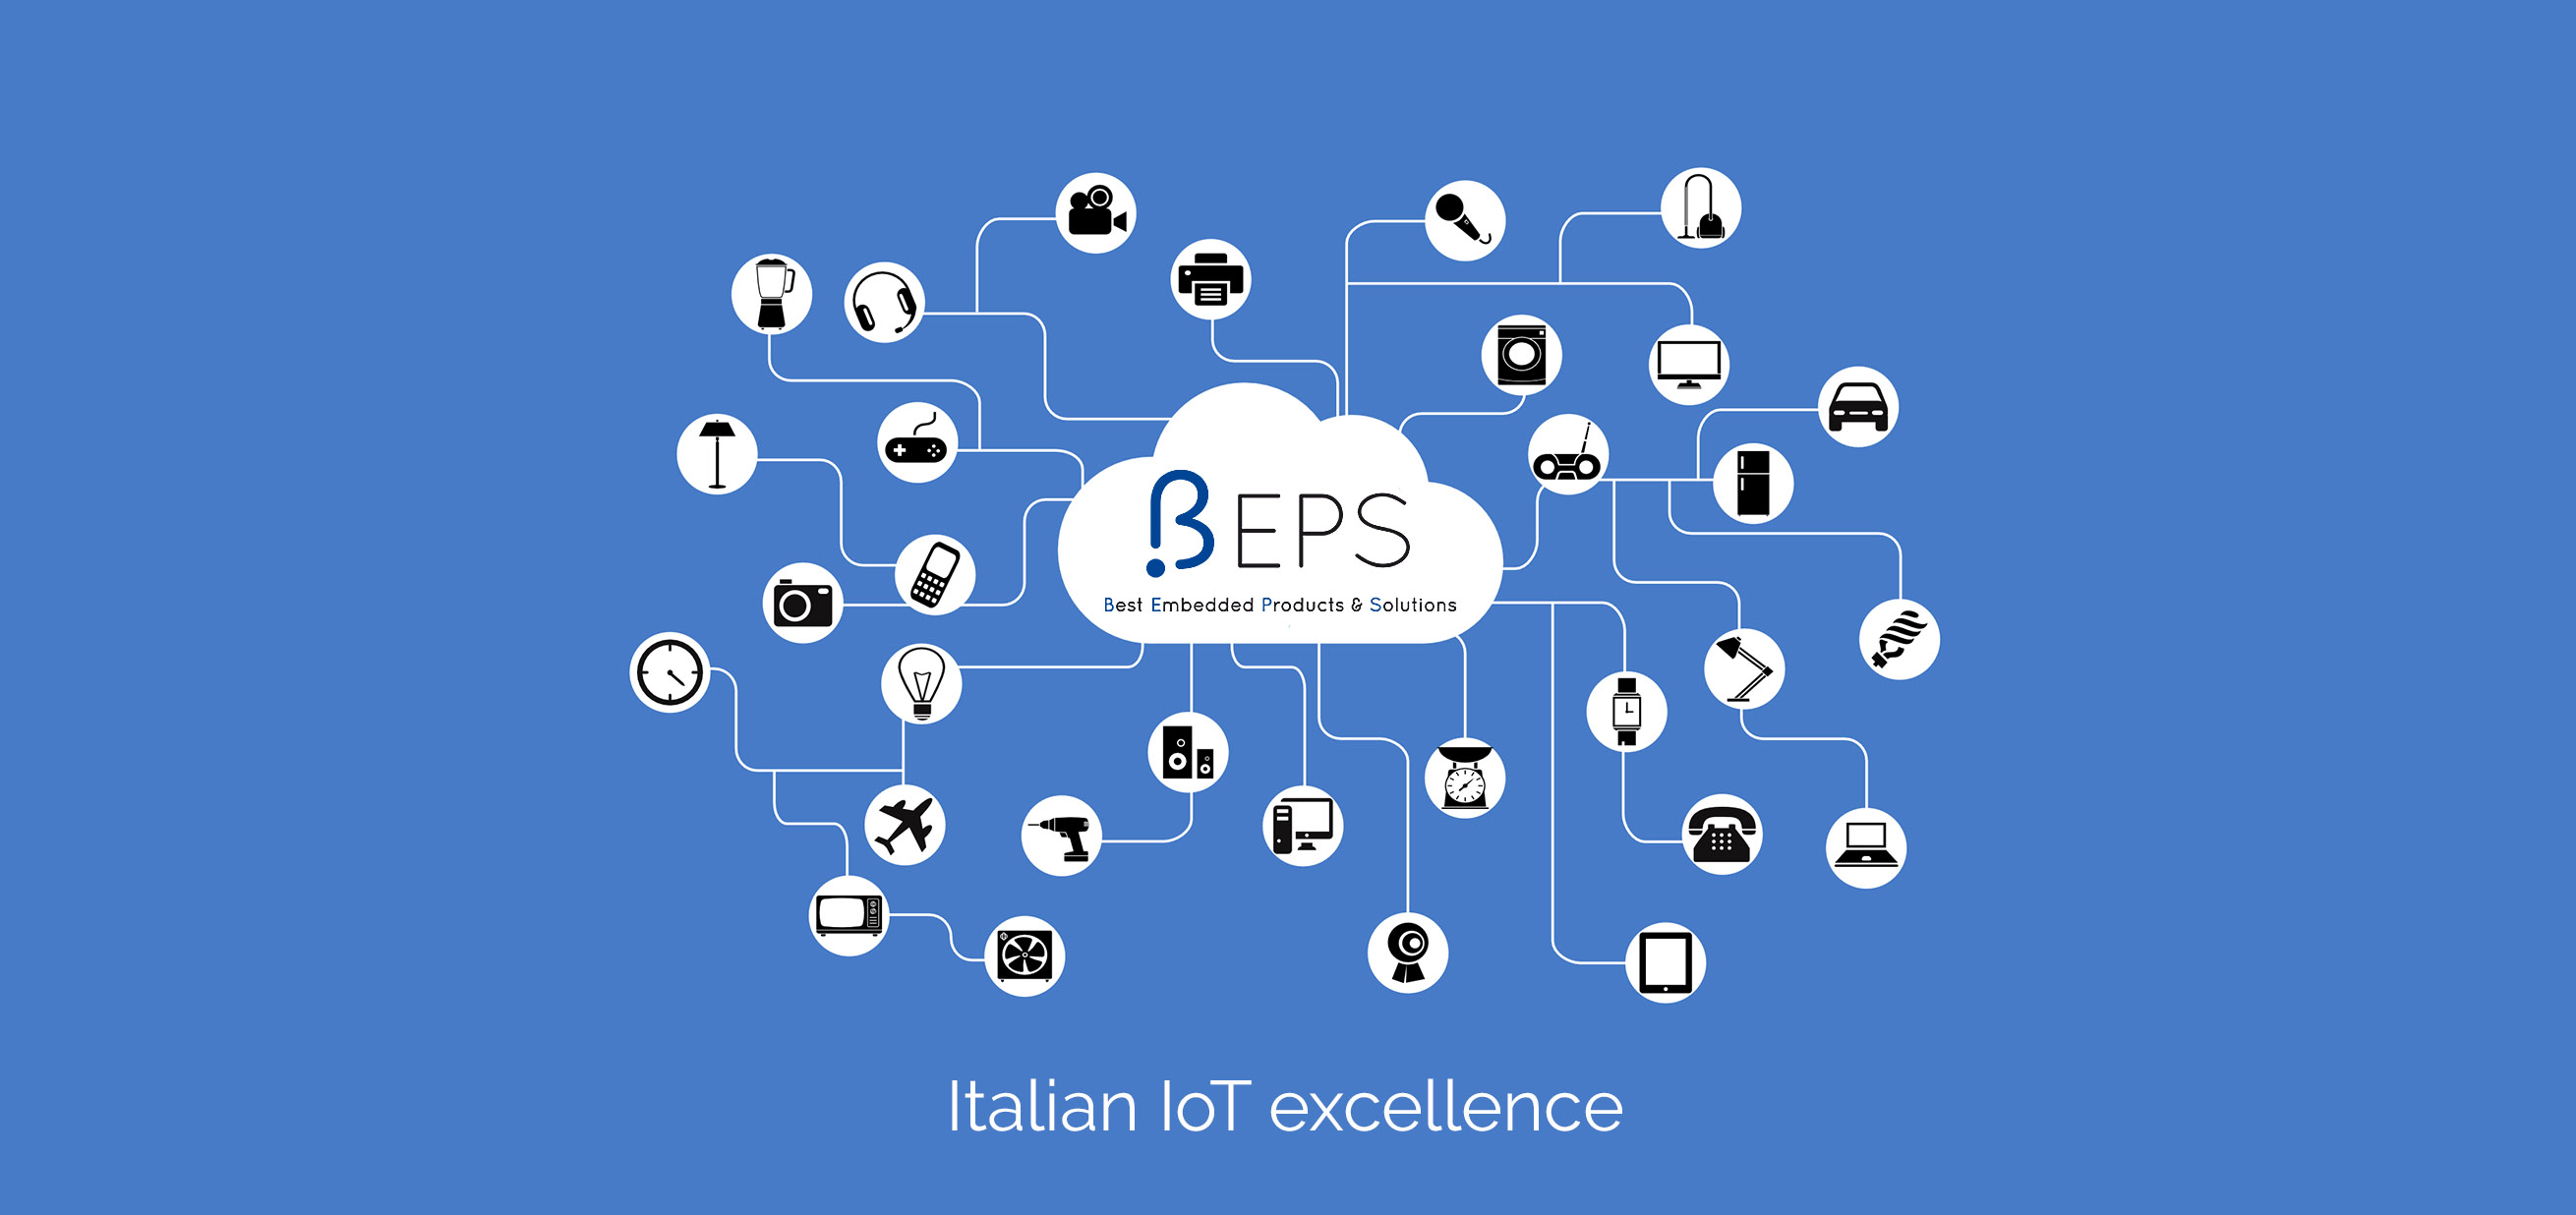 Beps IoT Excellence